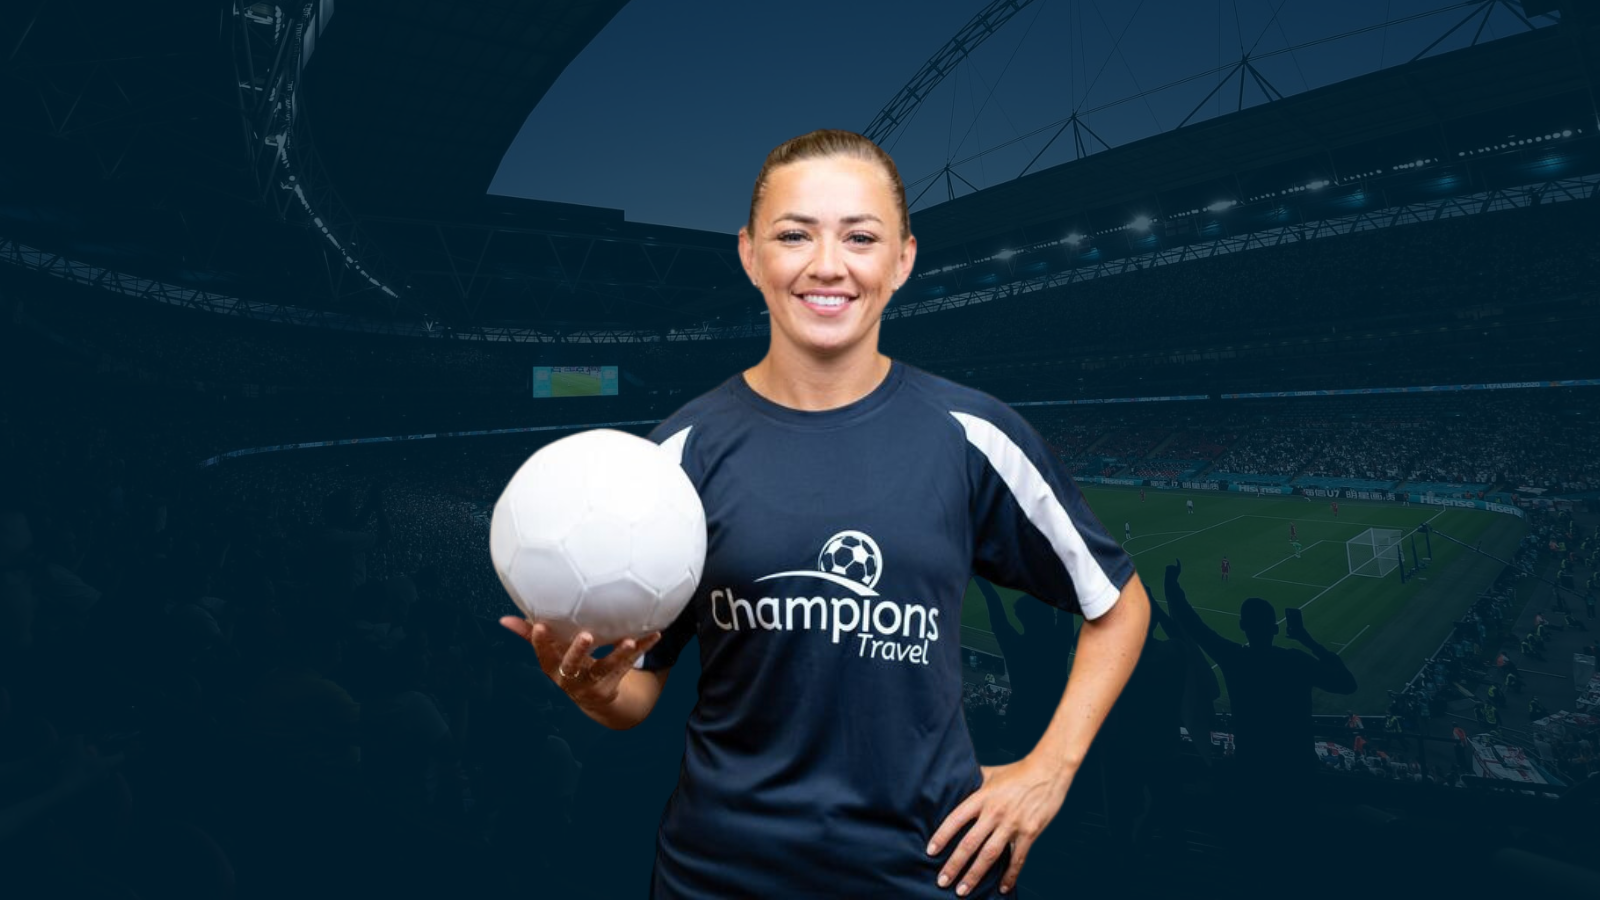 Katie McCabe Announced as Champions Travels Latest Brand Ambassador